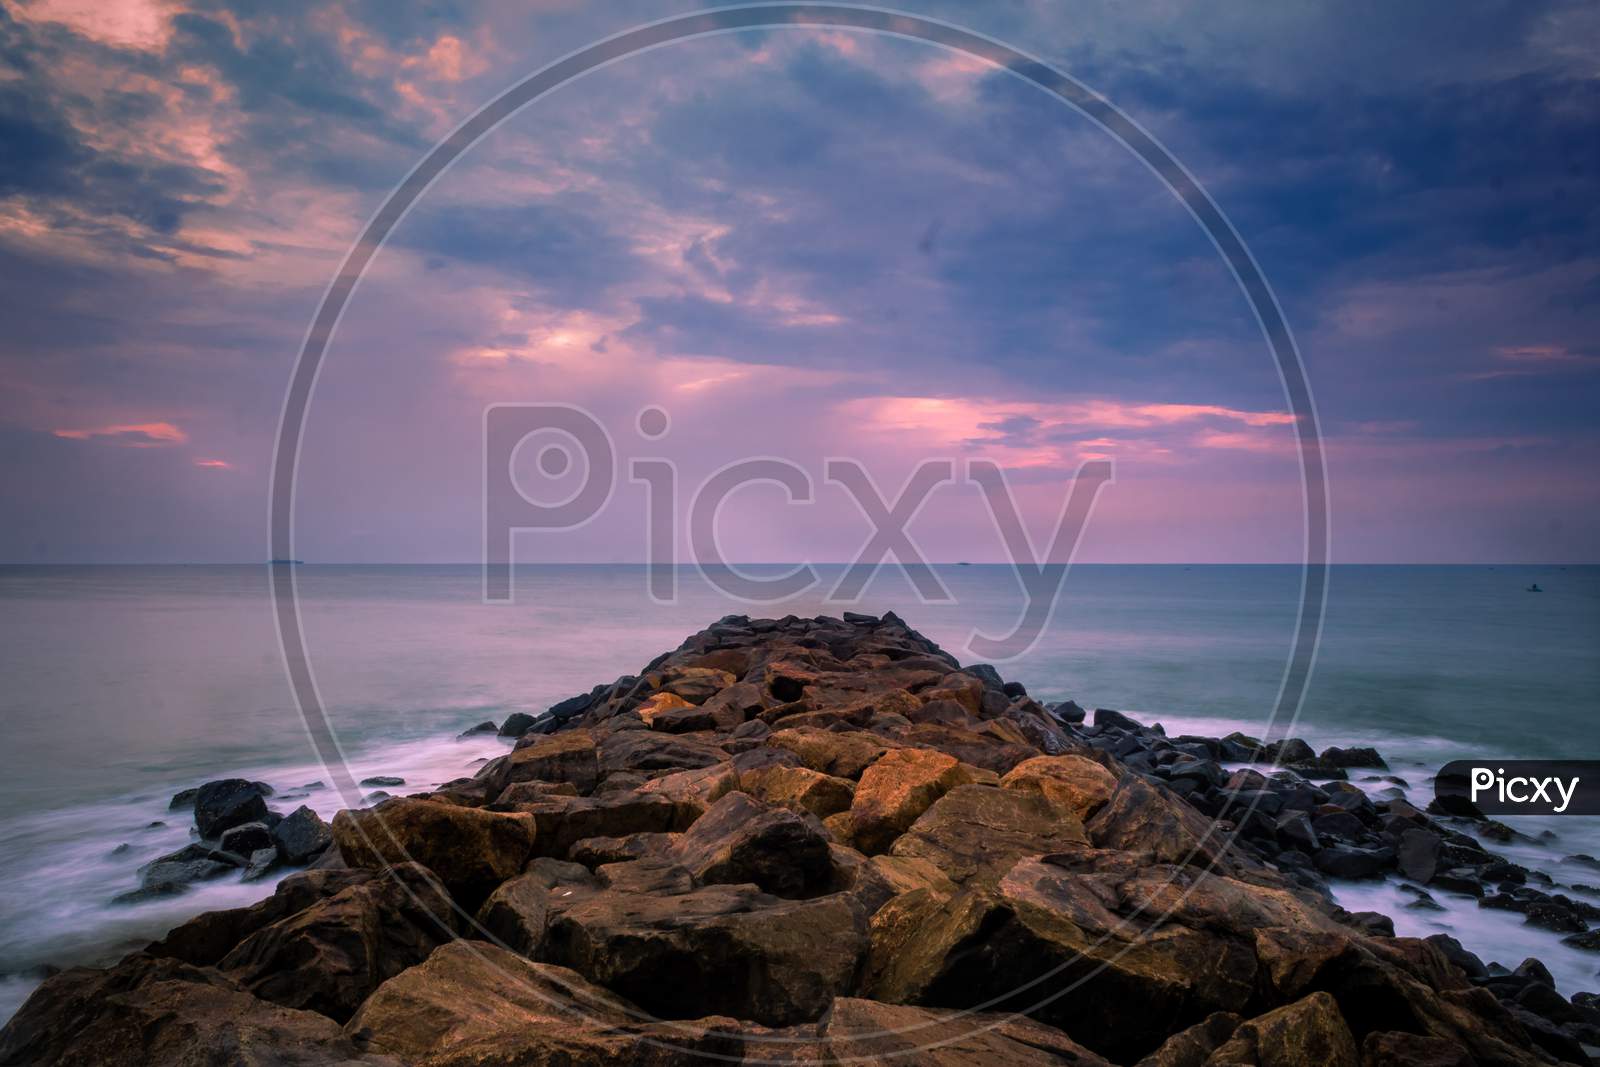 Beautiful Sunrise Over The Beach In Long Exposure. Moving Elements Sunrise And Wave Photography From The Rocky Beach In India. Wave Breaker Rocks, Slow-Shutter Sea Waves And Rocks Photography.